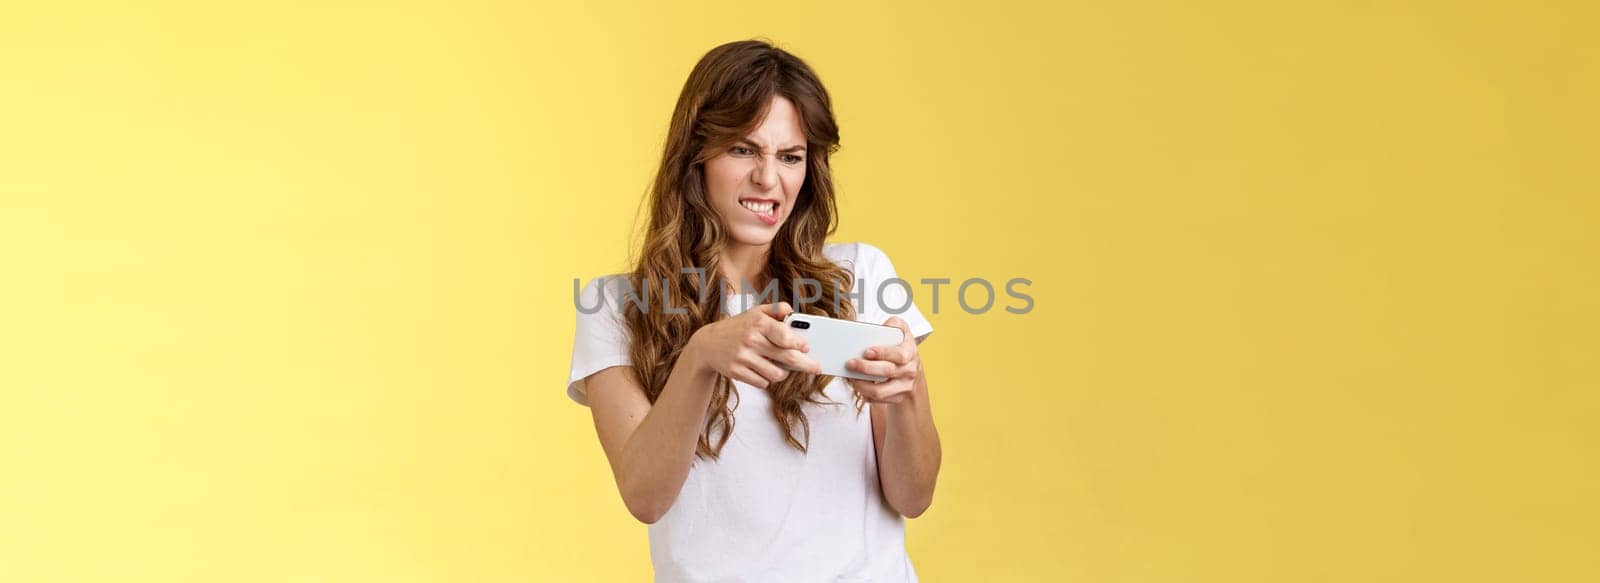 Excited focused playful enthusiastic geeky attractive girl trying beat score hold smartphone horizontal grimacing intense look screen playing awesome arcade game yellow background.